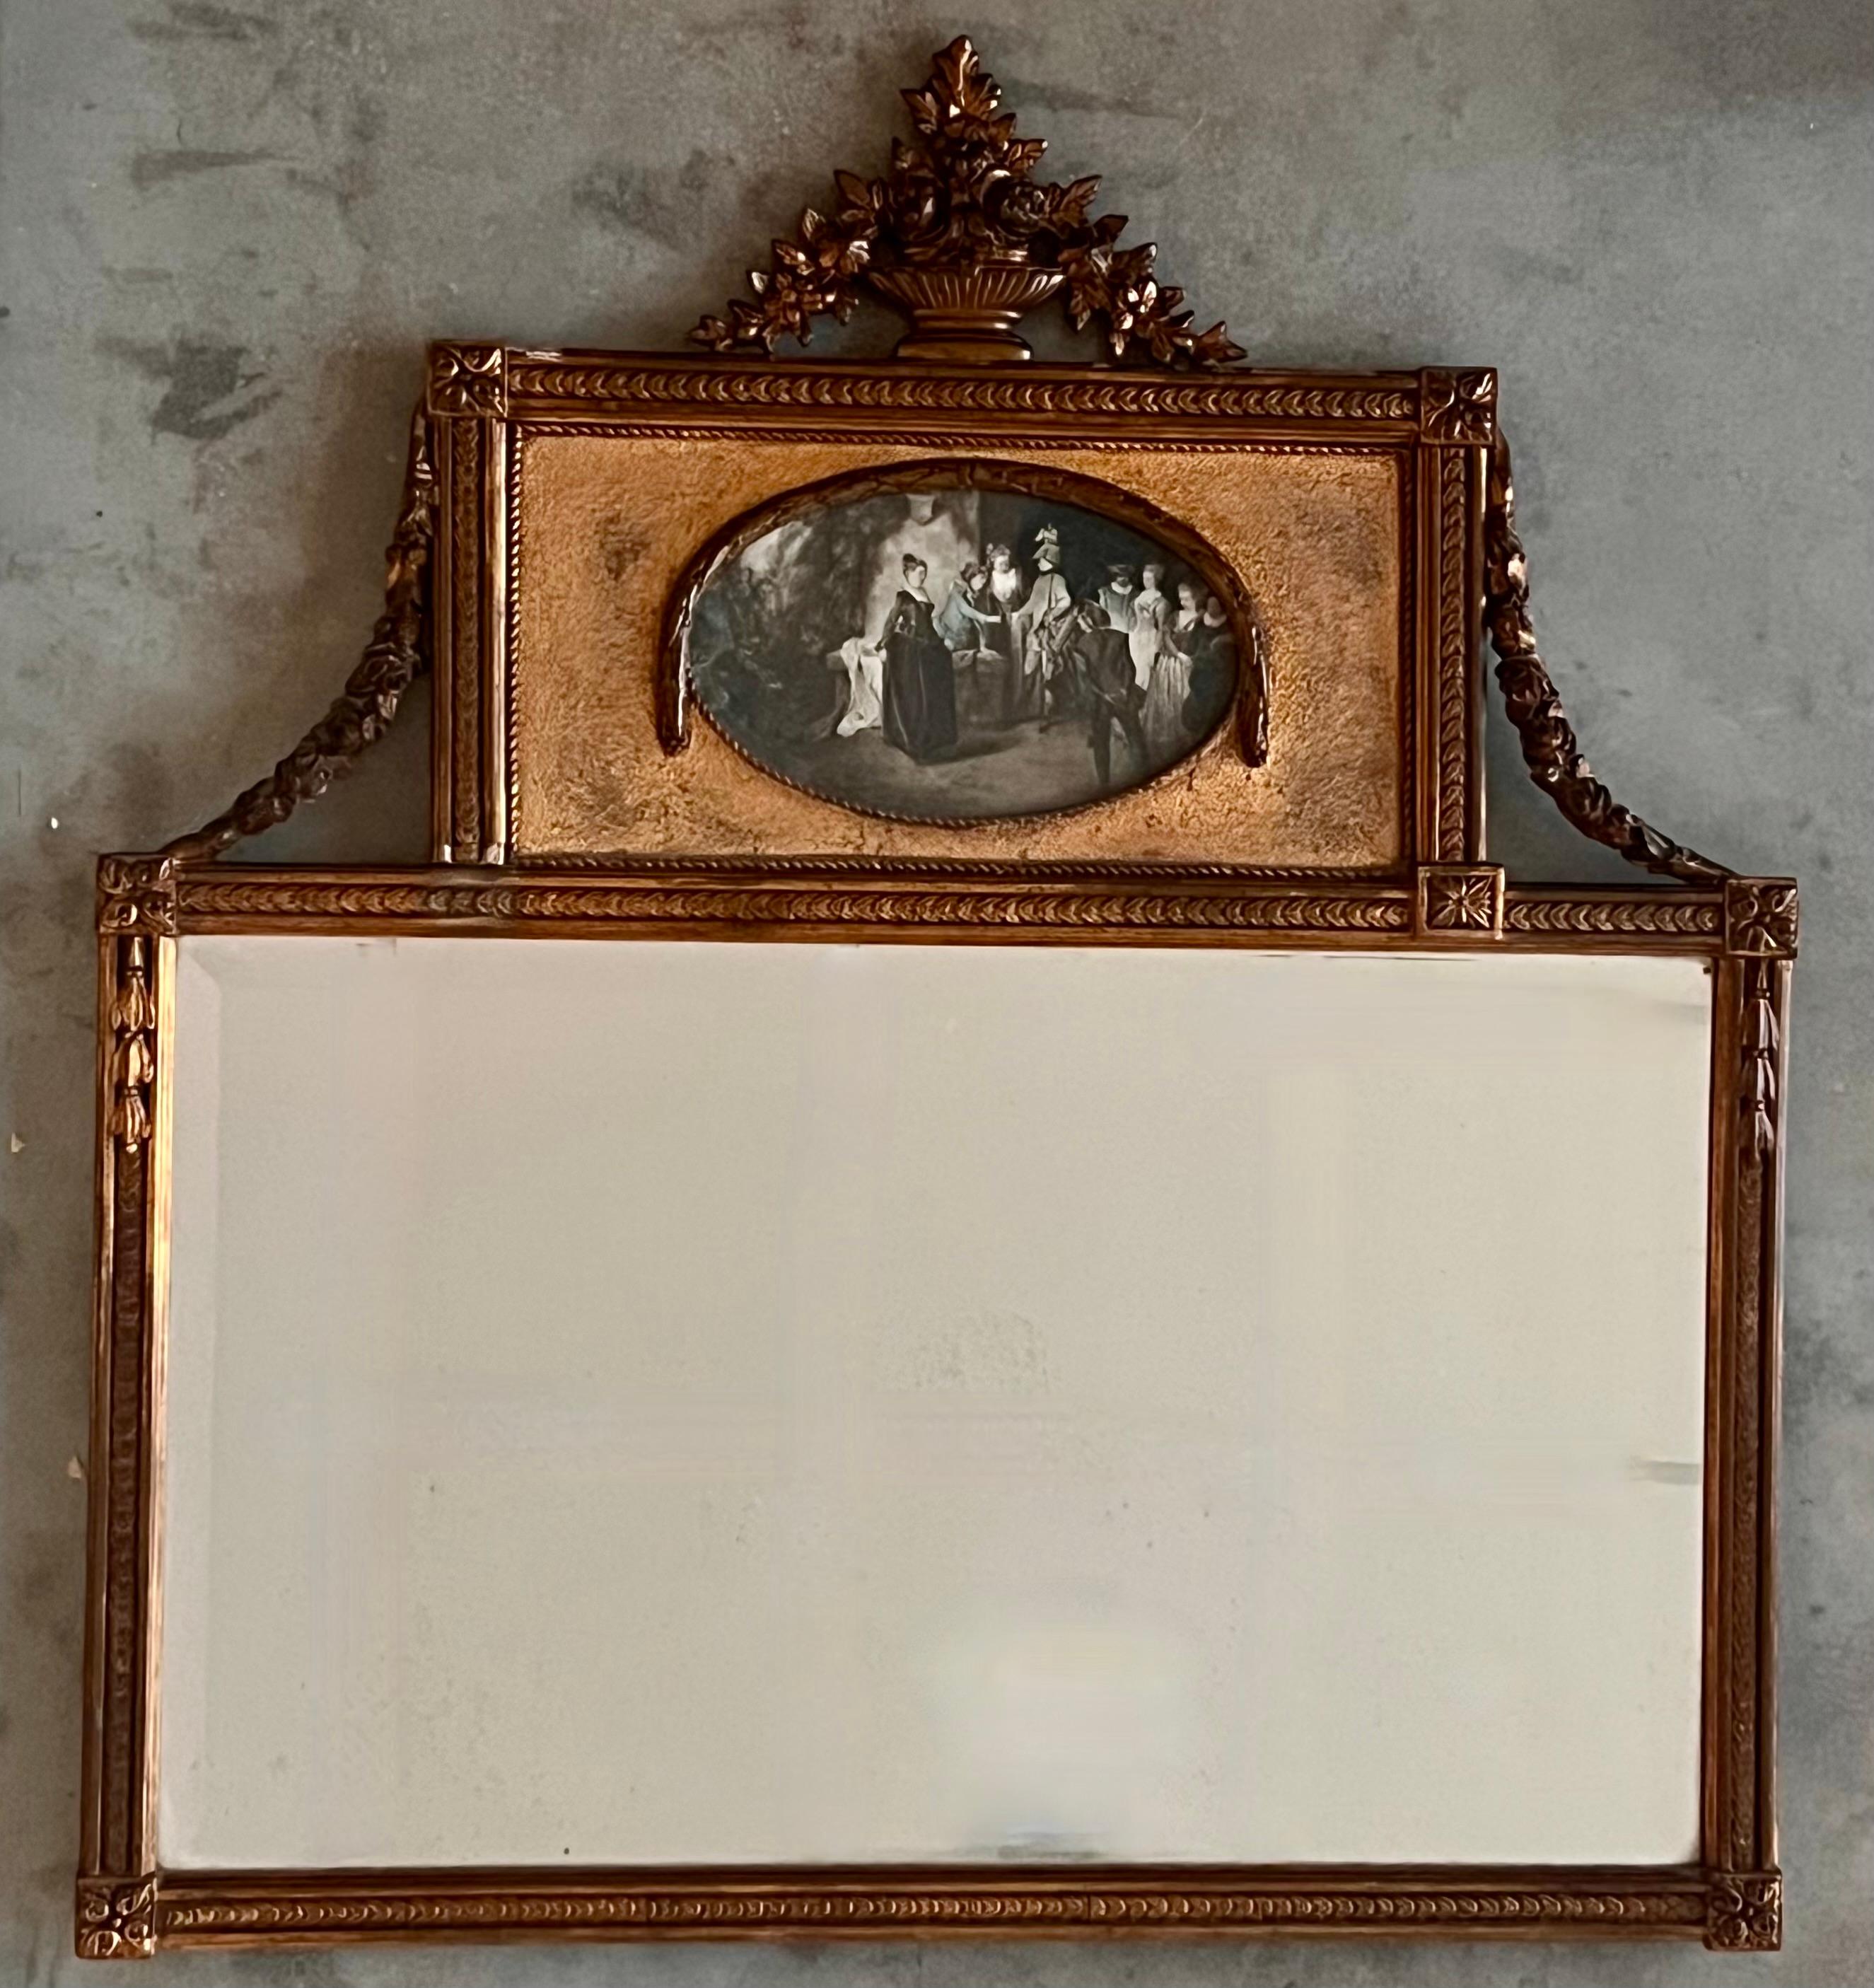 A fine Louis XVI style trumeau wall mirror in wood and gilded stucco. Its upper section features an oval-shaped reproduction of an original colour engraving of an 18th-century pastoral scene, enclosed within delicate pearl beading and topped with a